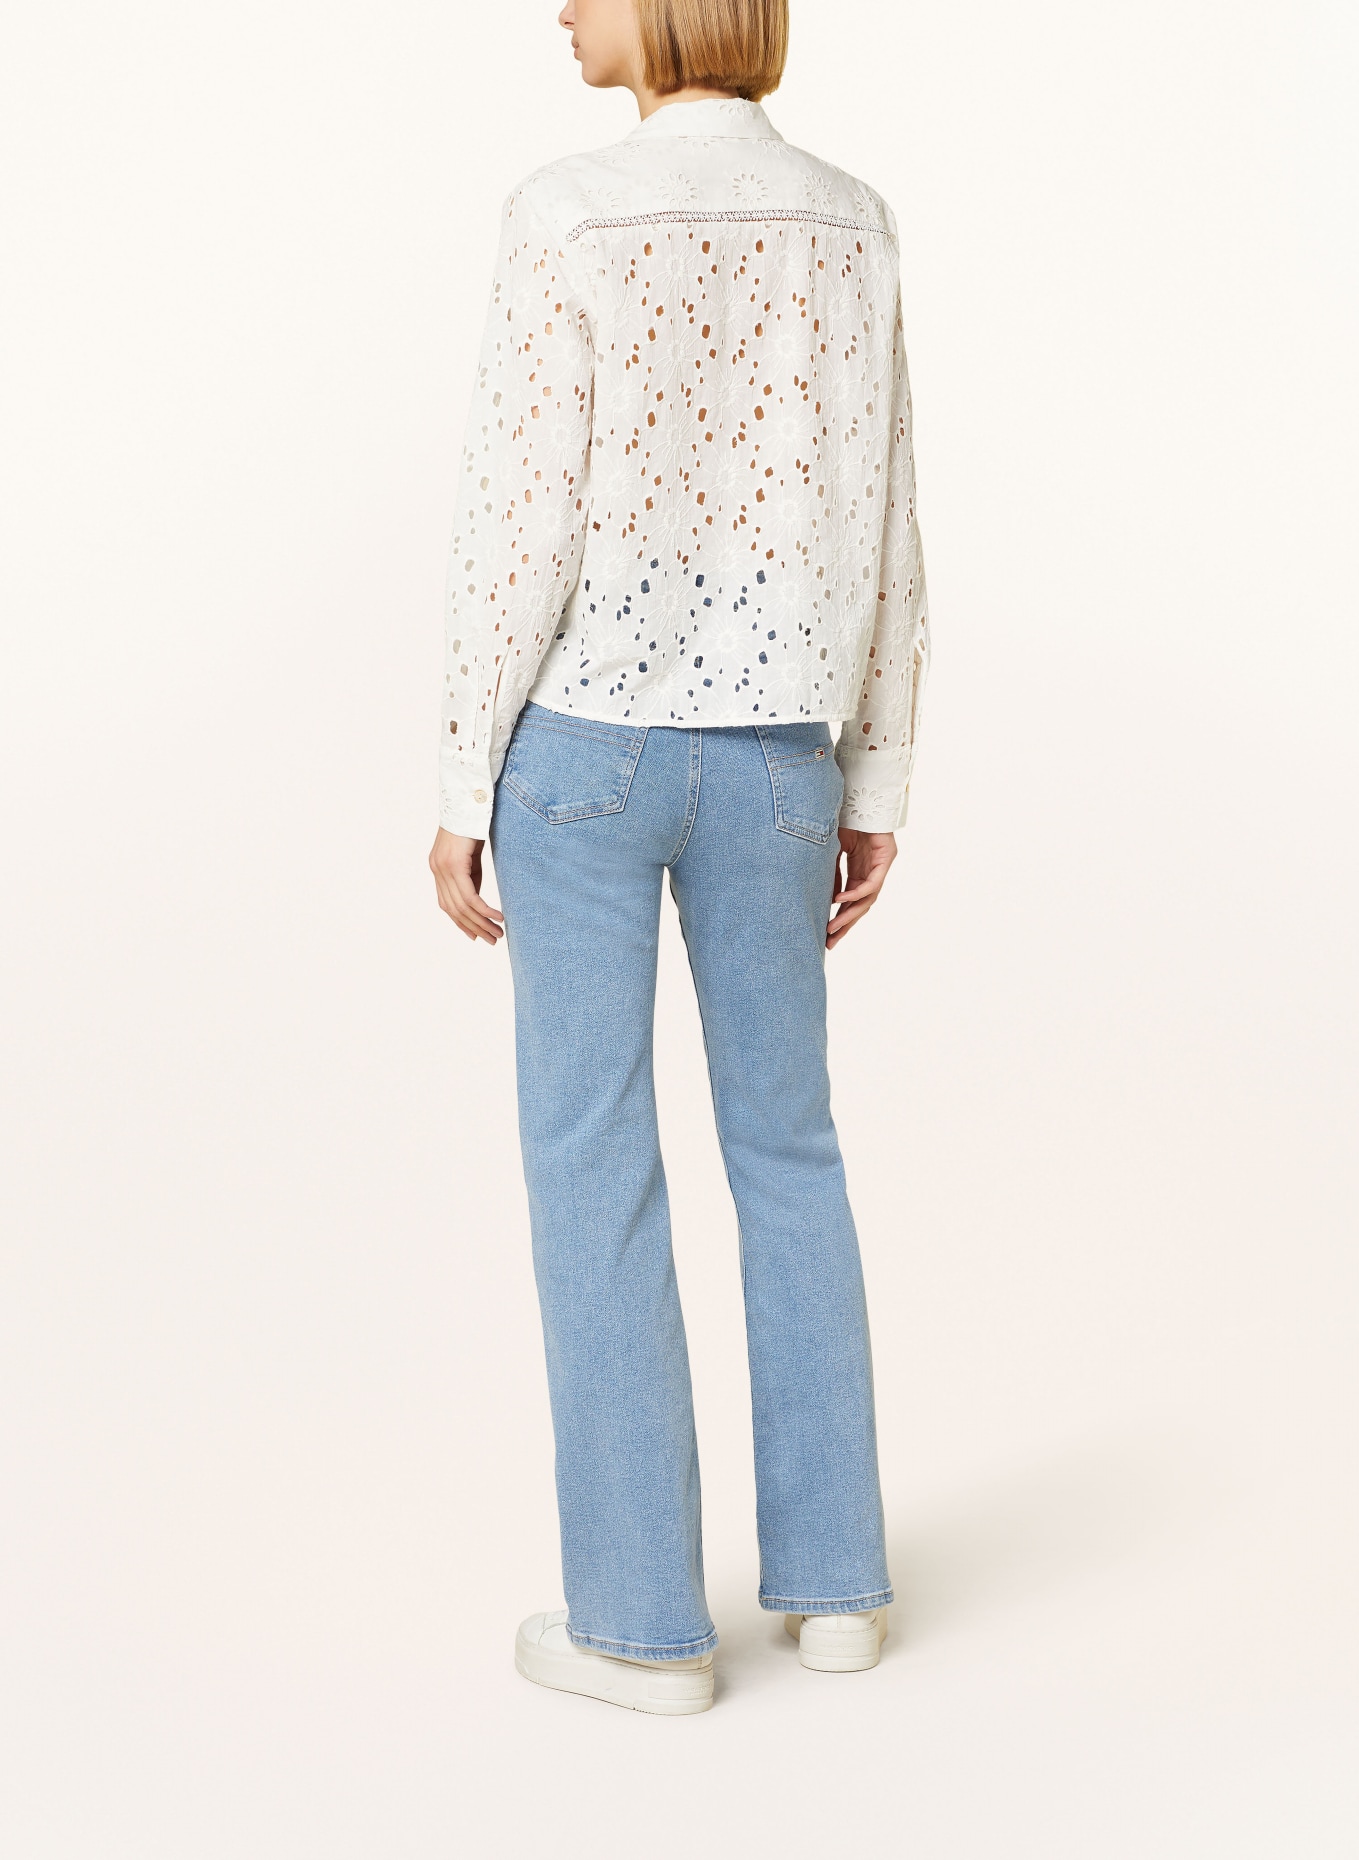 Princess GOES HOLLYWOOD Shirt blouse made of broderie anglaise, Color: WHITE (Image 3)